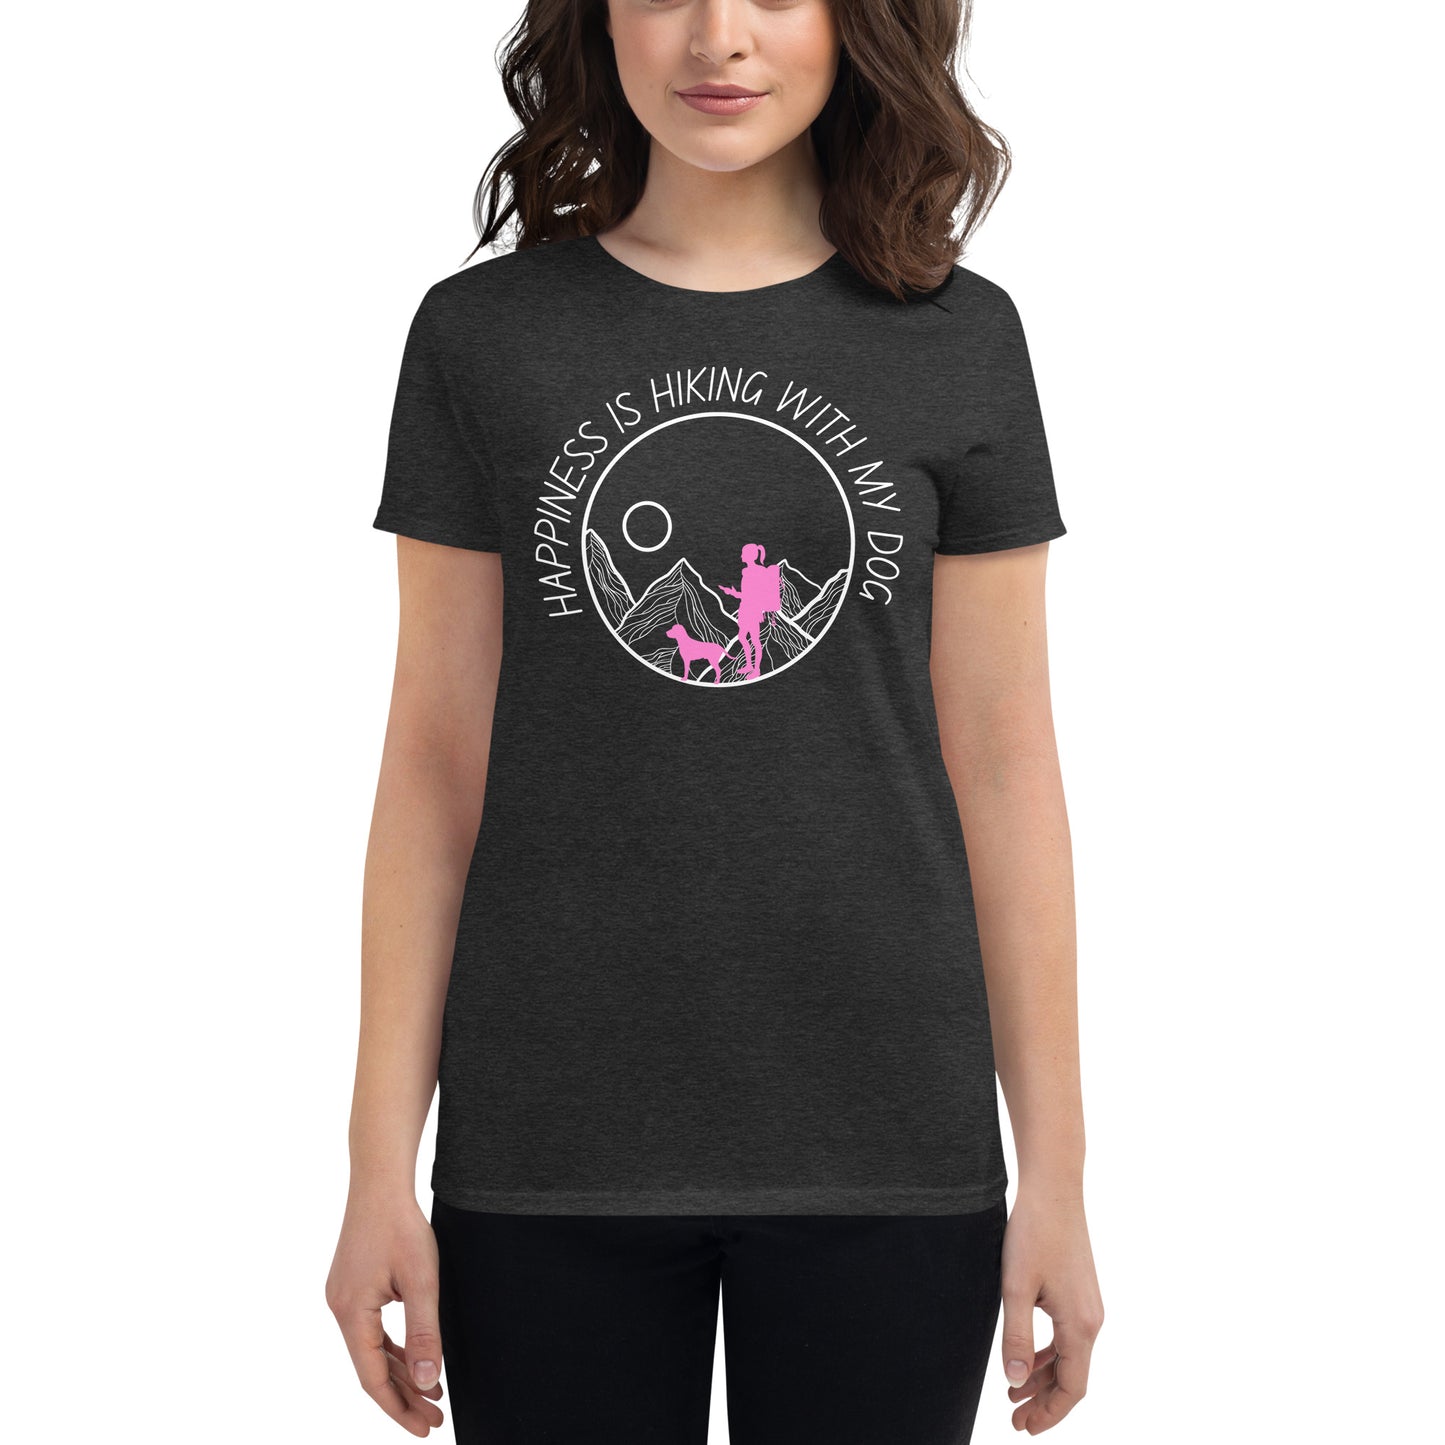 Happiness is hiking with my dog - Women's short sleeve t-shirt